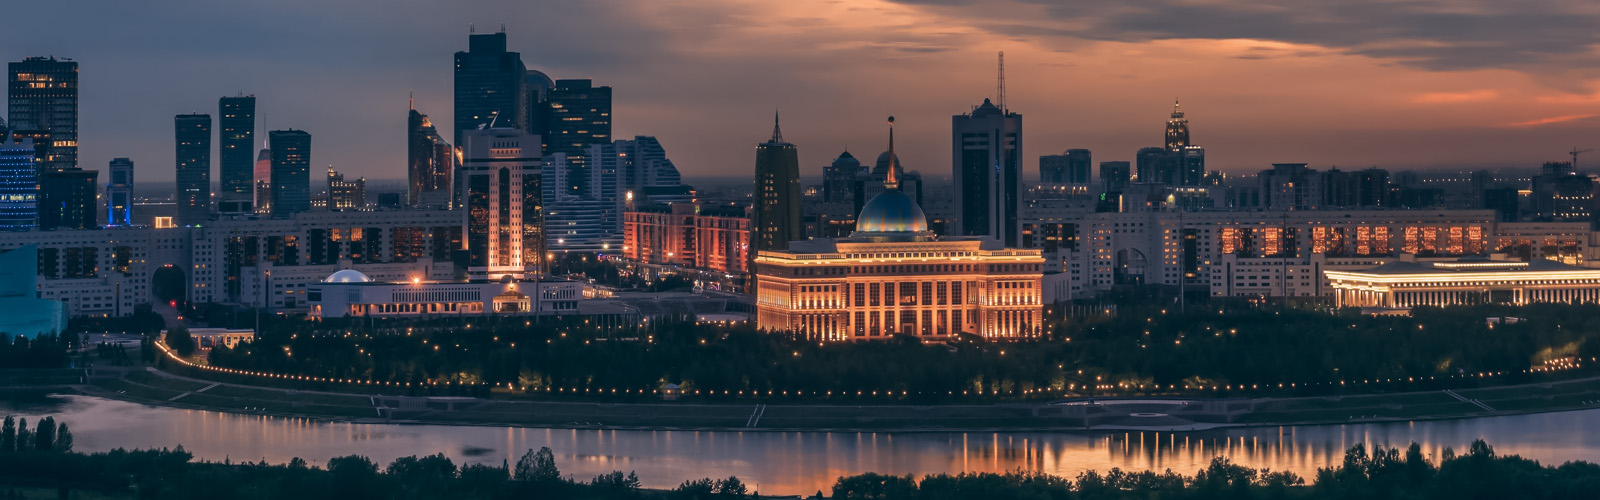 Historical Places In Astana